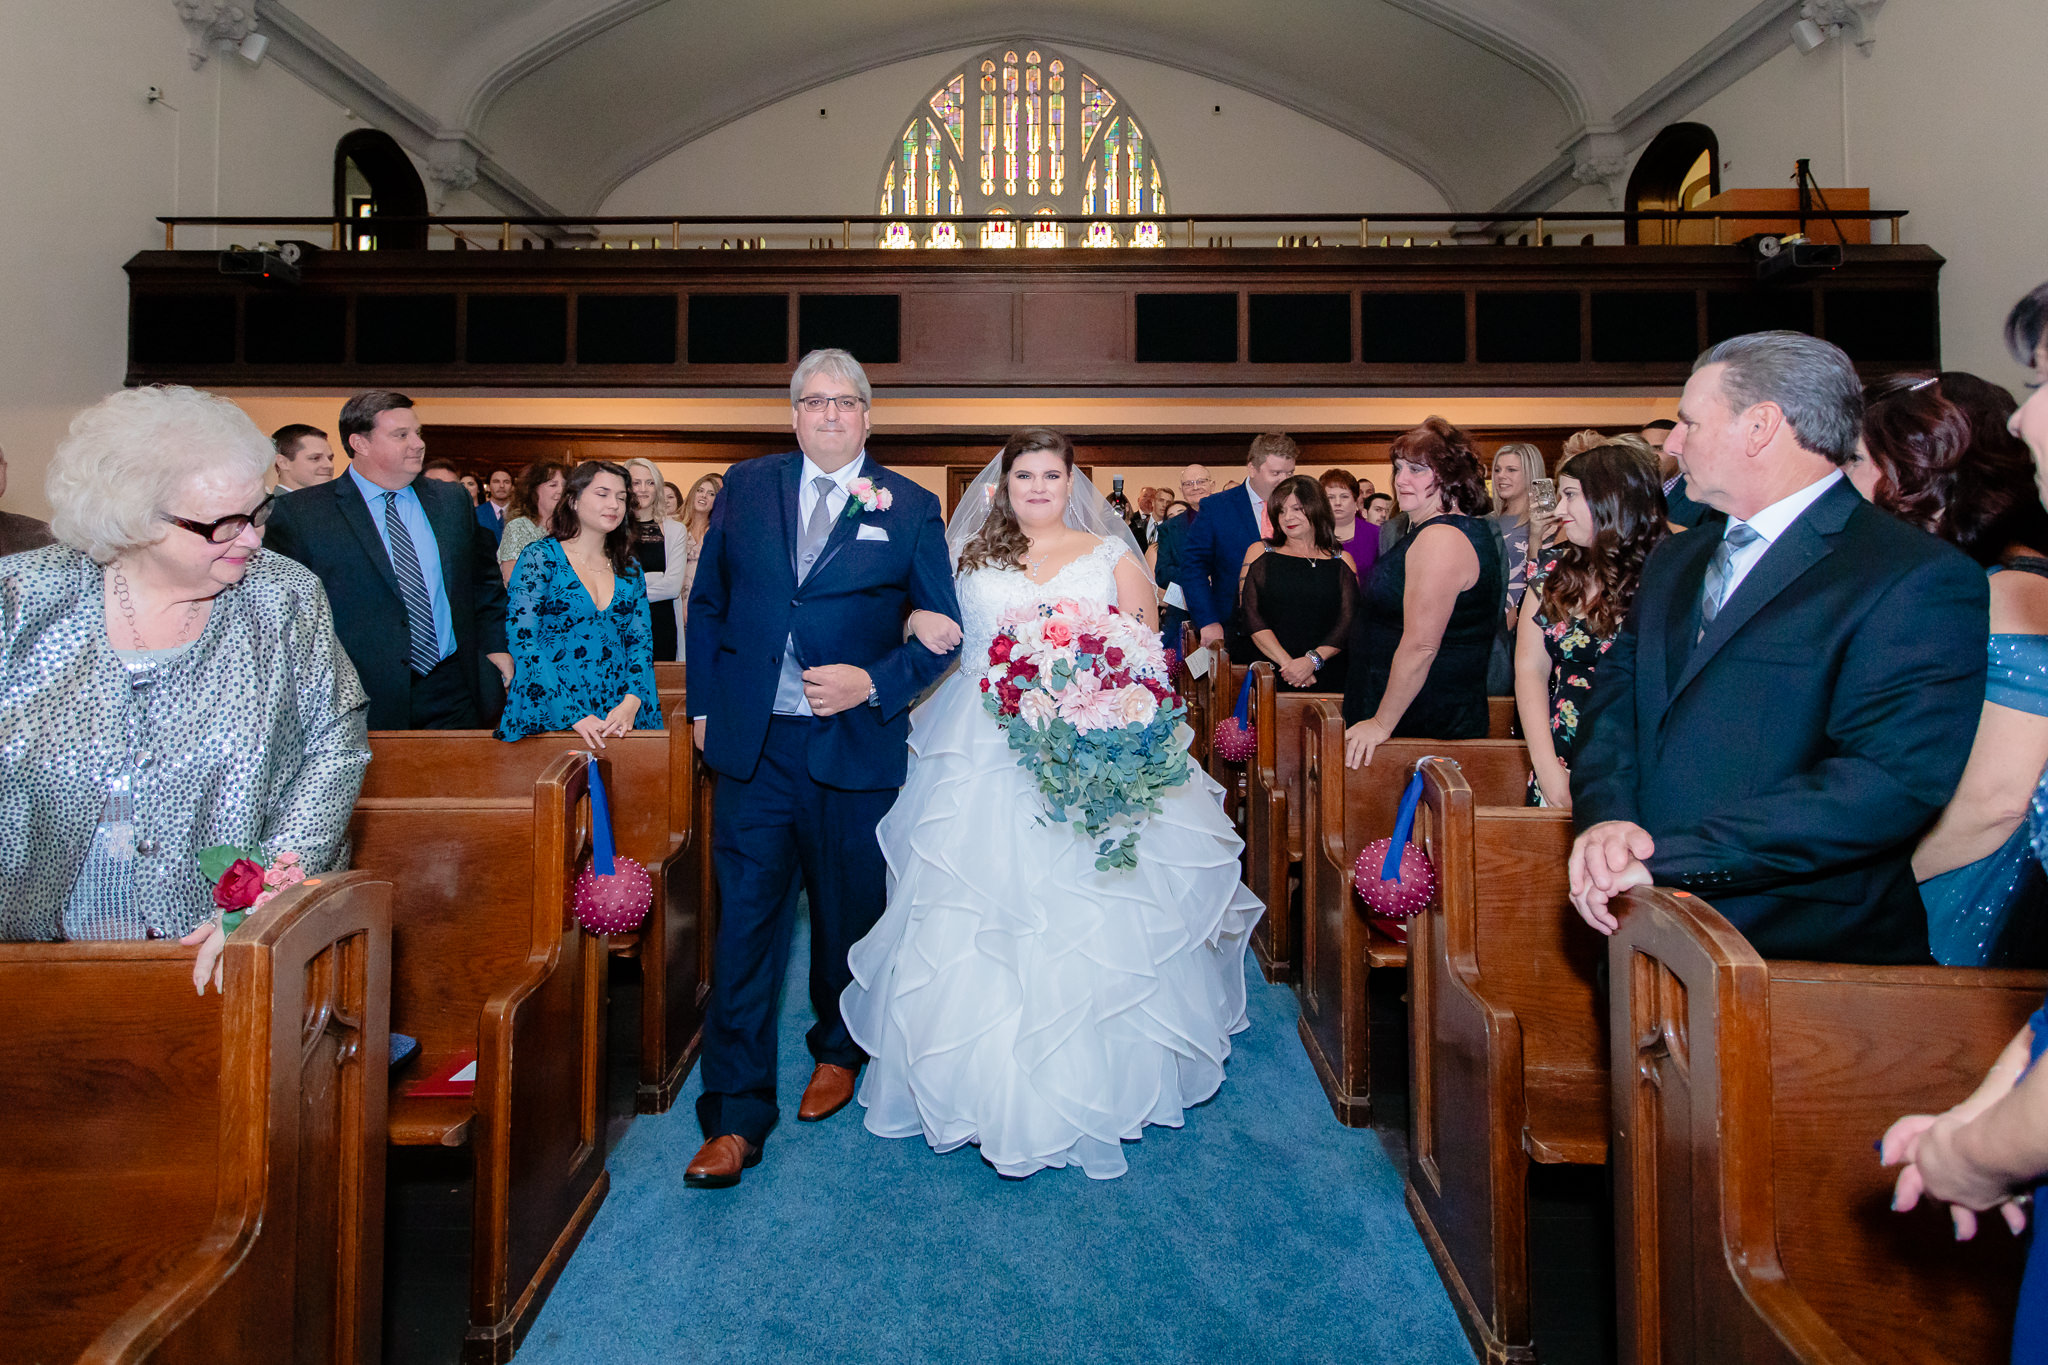 The bride and her father walking down the aisle at Mt. Lebanon United Methodist Church